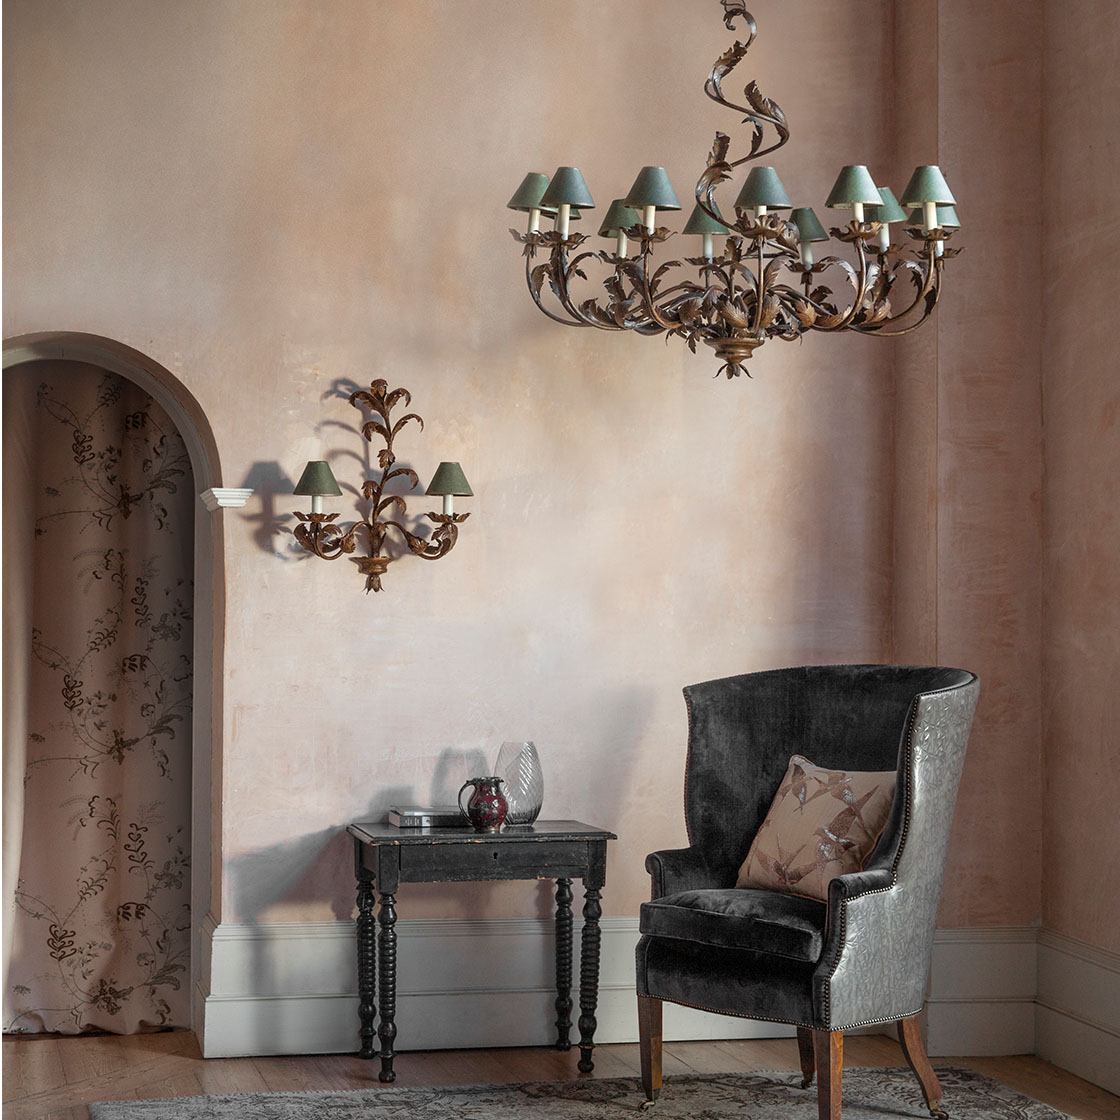 Borghese large 12 arm chandelier in Wrought iron with Spencer chair and Elvira cushion - Beaumont & Fletcher